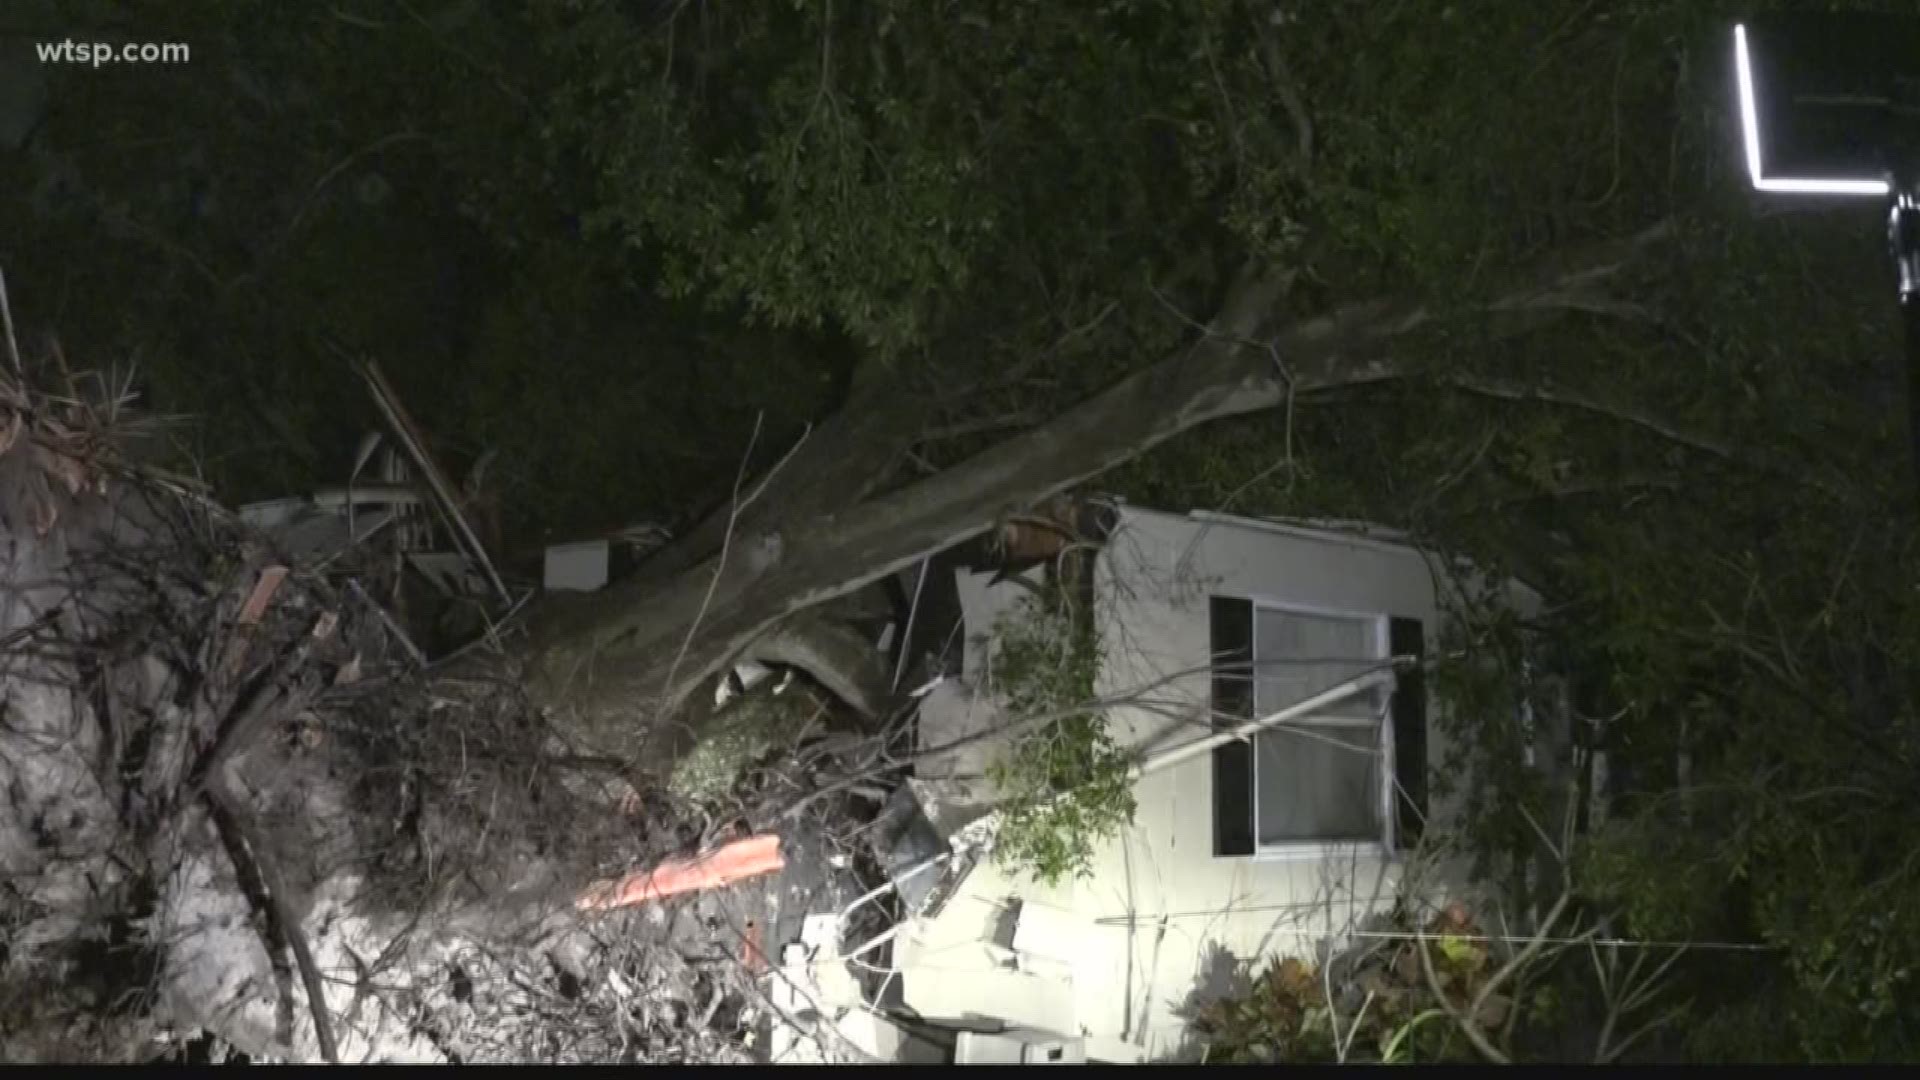 Neighbors are picking up their neighborhood in Pinellas Park after an EF-0 tornado tore through.